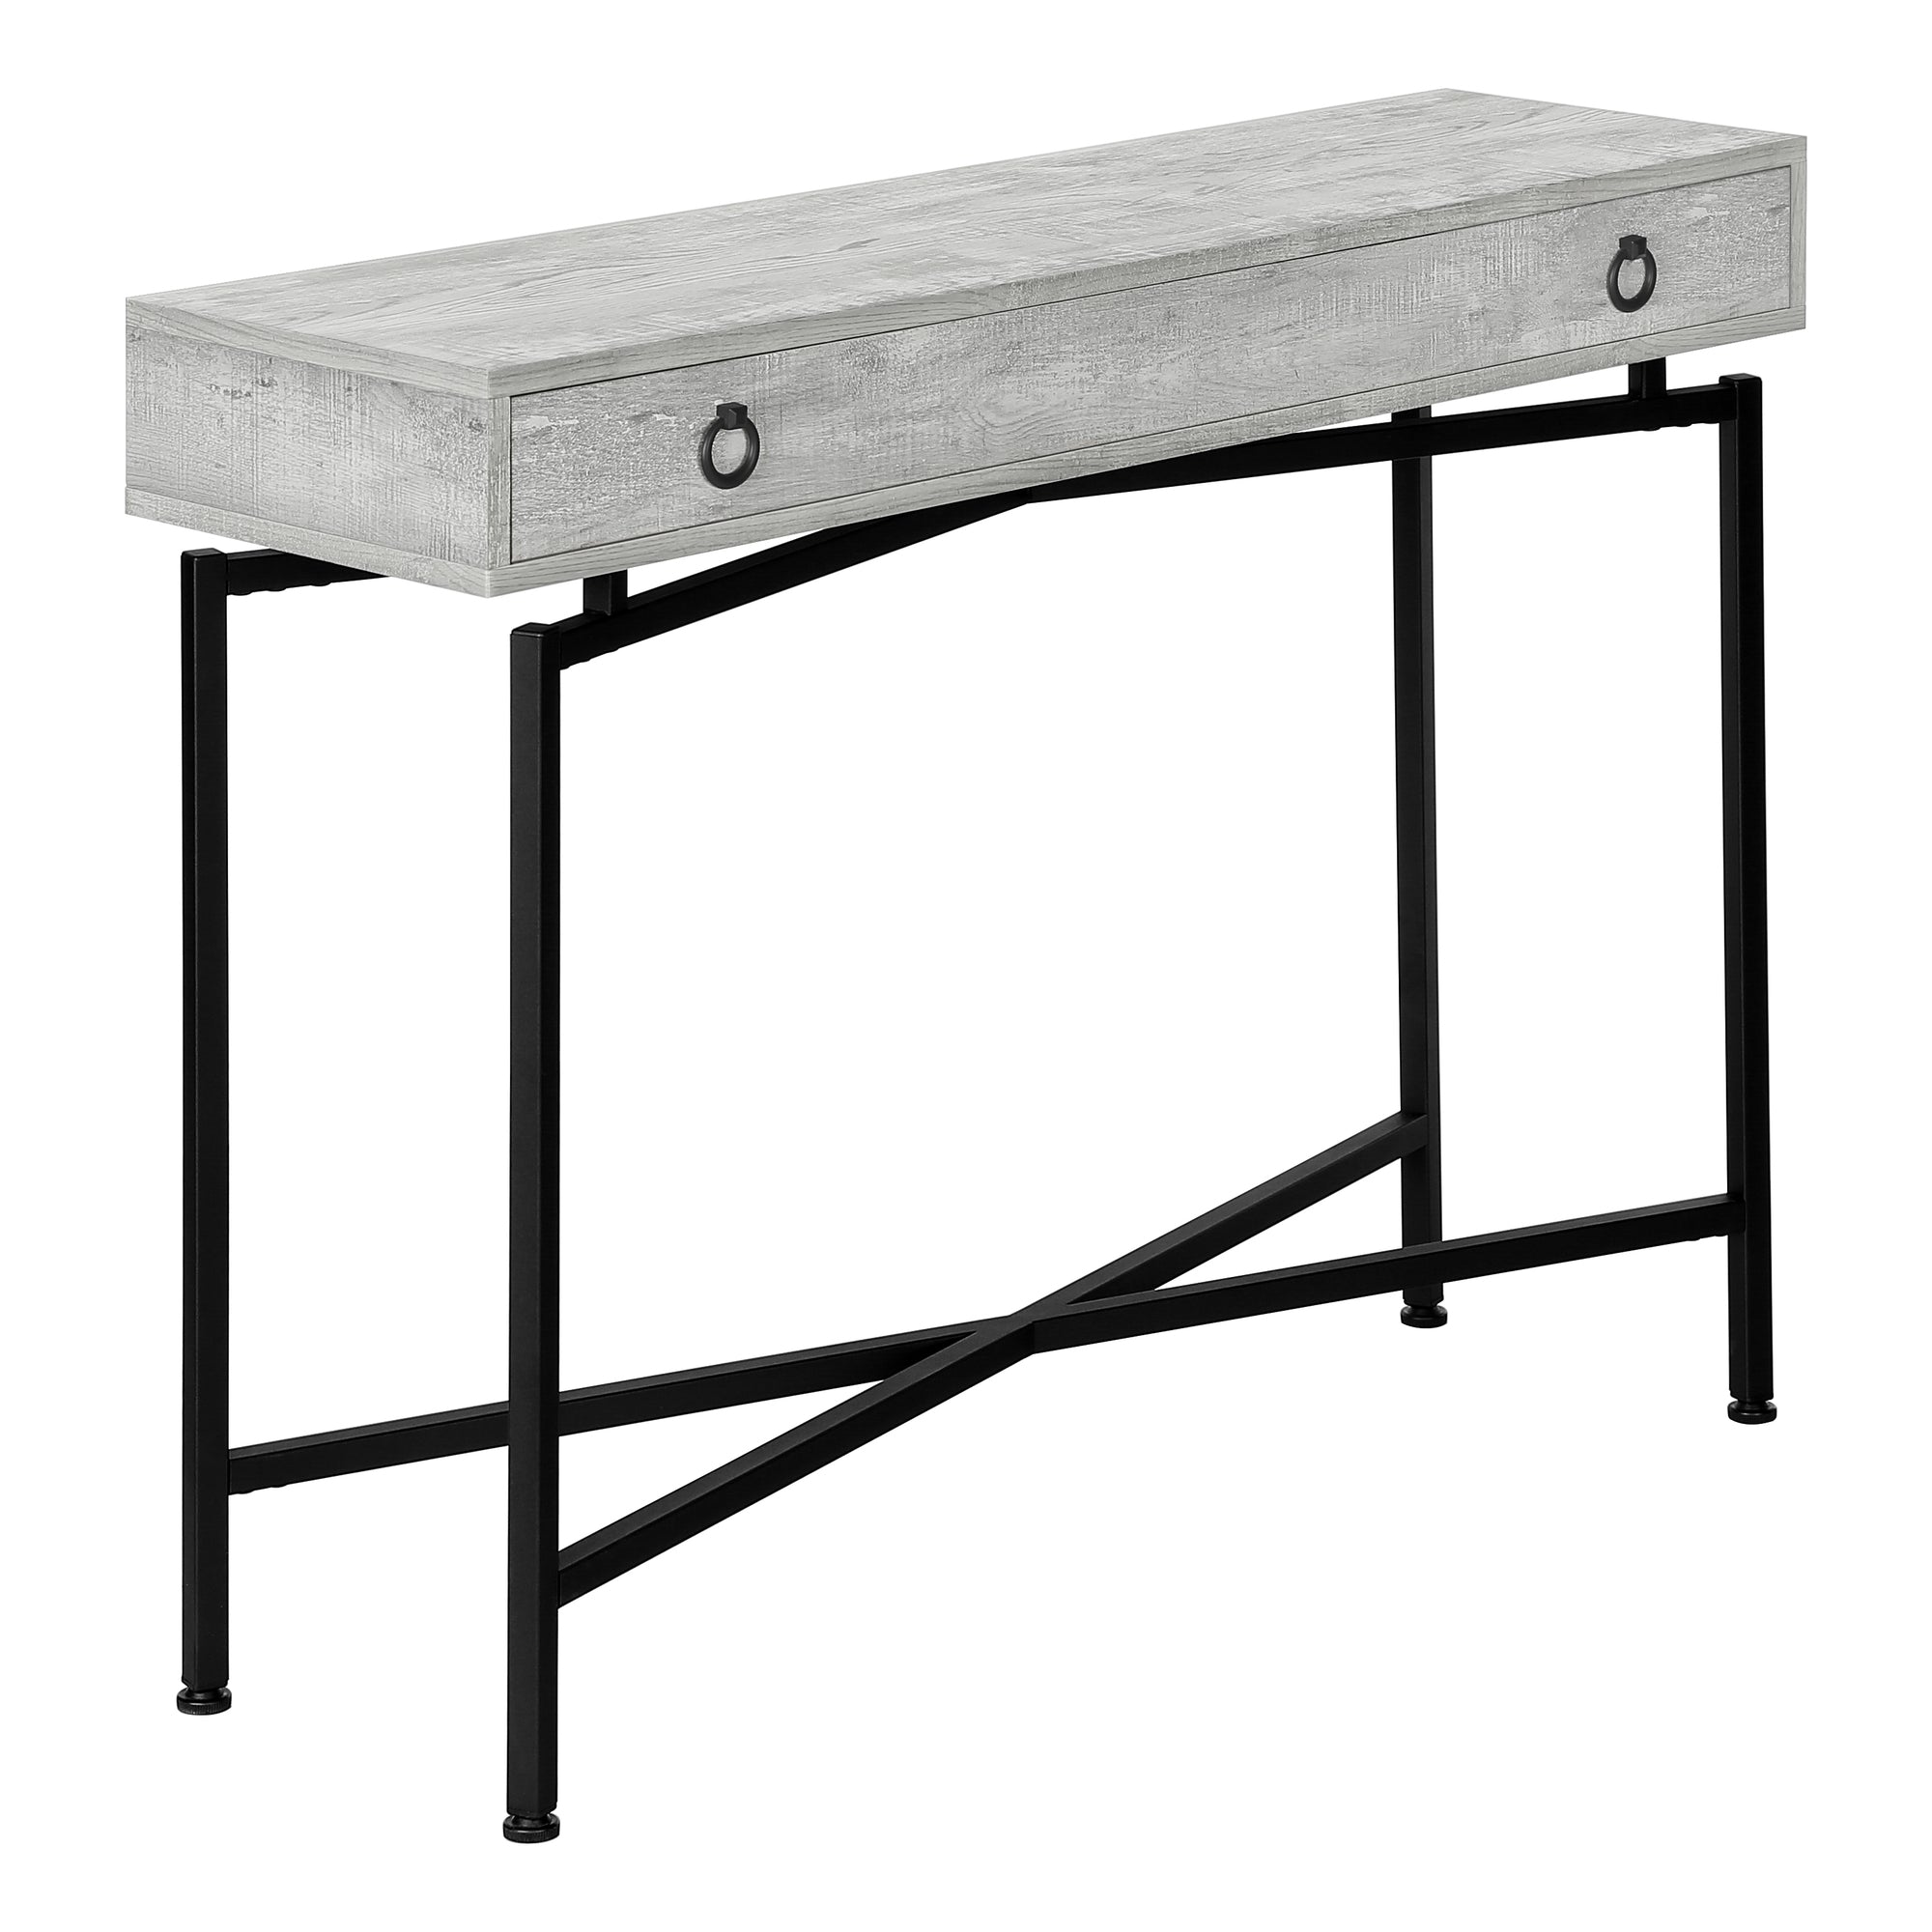 MN-723454    Accent Table, Console, Entryway, Narrow, Sofa, Living Room, Bedroom, Metal Legs, Laminate, Grey Reclaimed Wood Look, Black, Contemporary, Modern